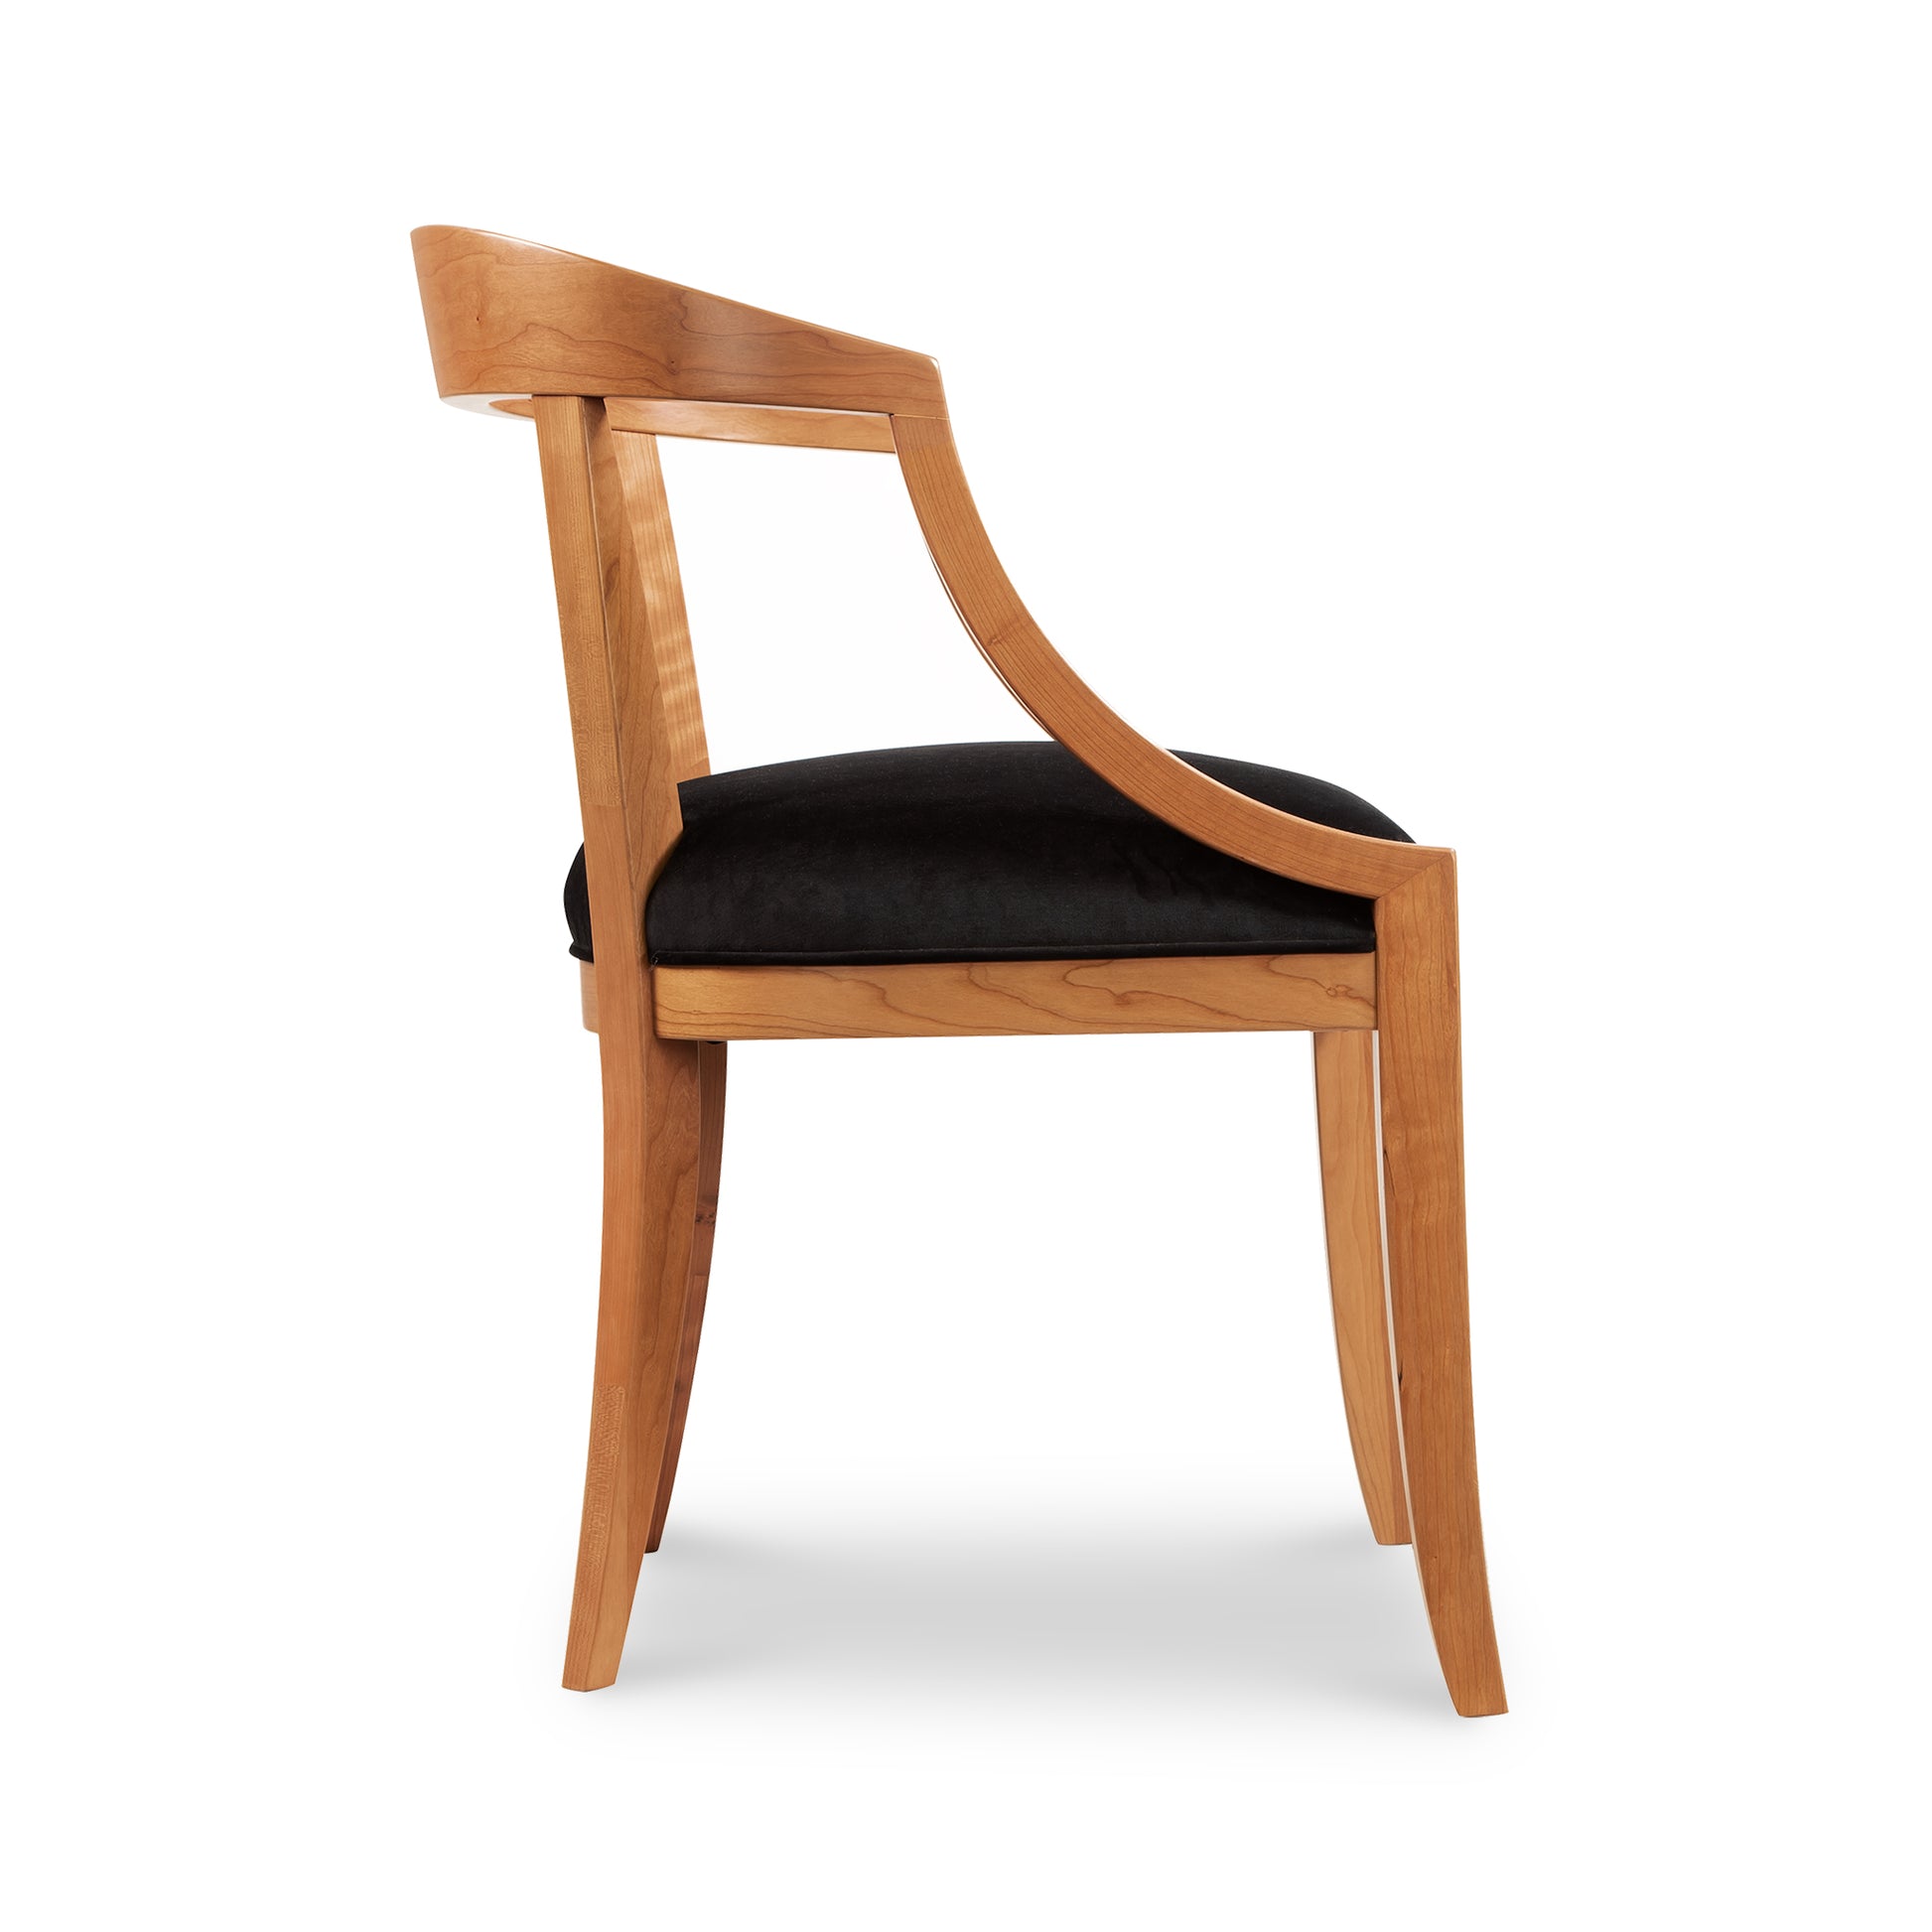 A Vermont Woods Studios Dorset Chair with a curved backrest and a black cushioned seat, isolated on a white background.